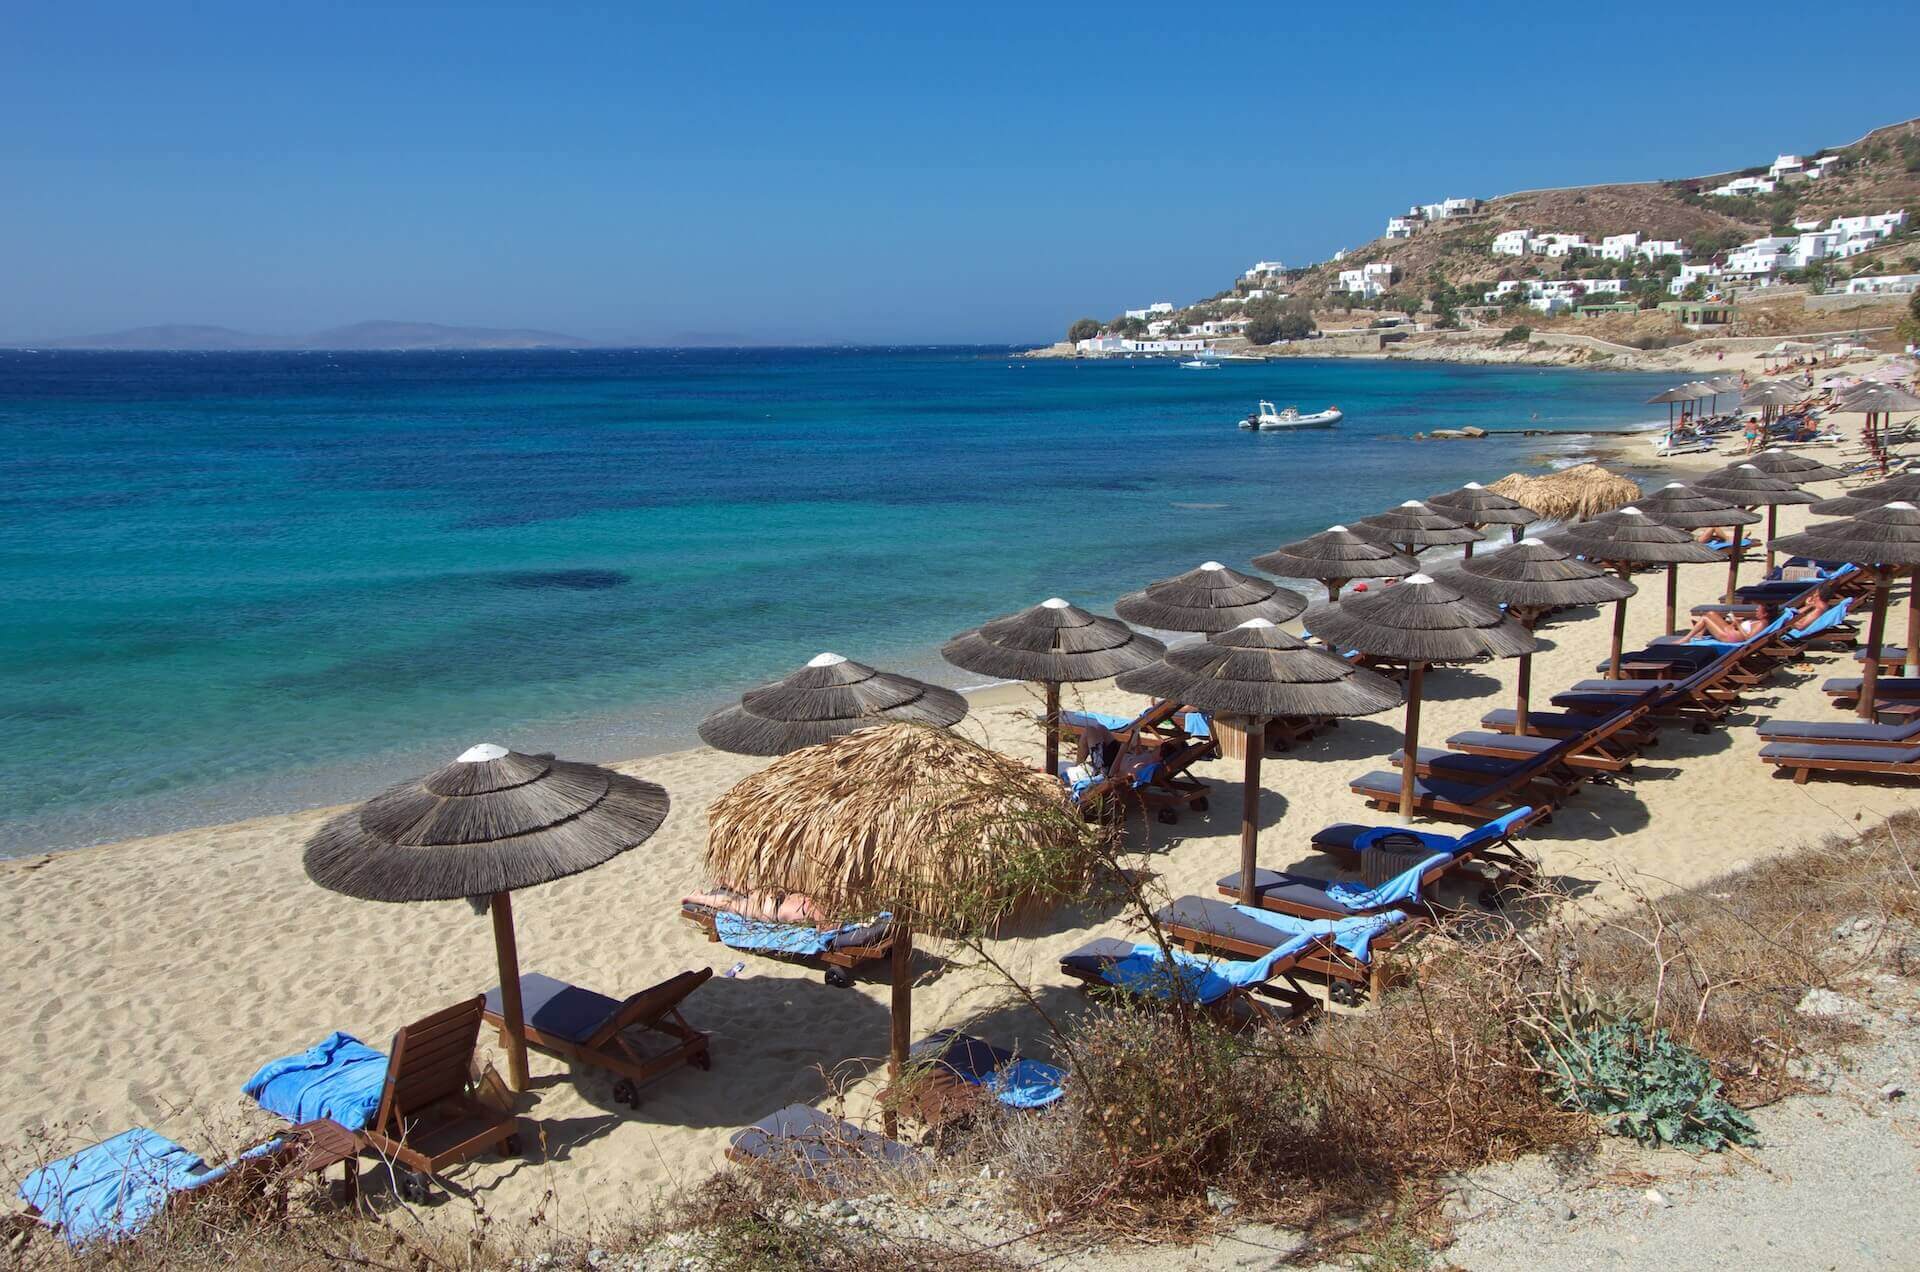 View of the sunbeds and umbrellas on the coast of Mykonos